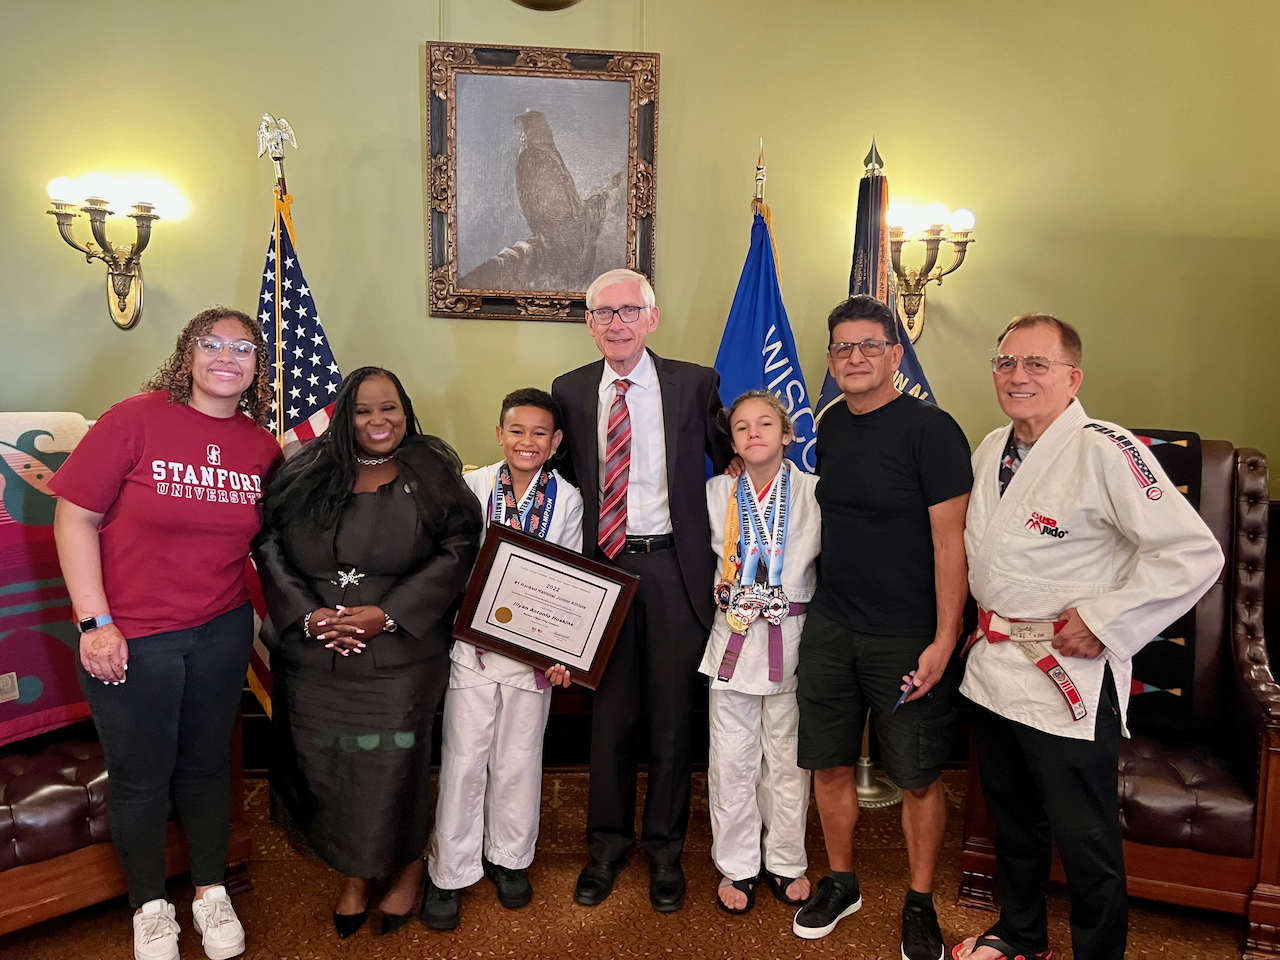 competitors and Governor Evers